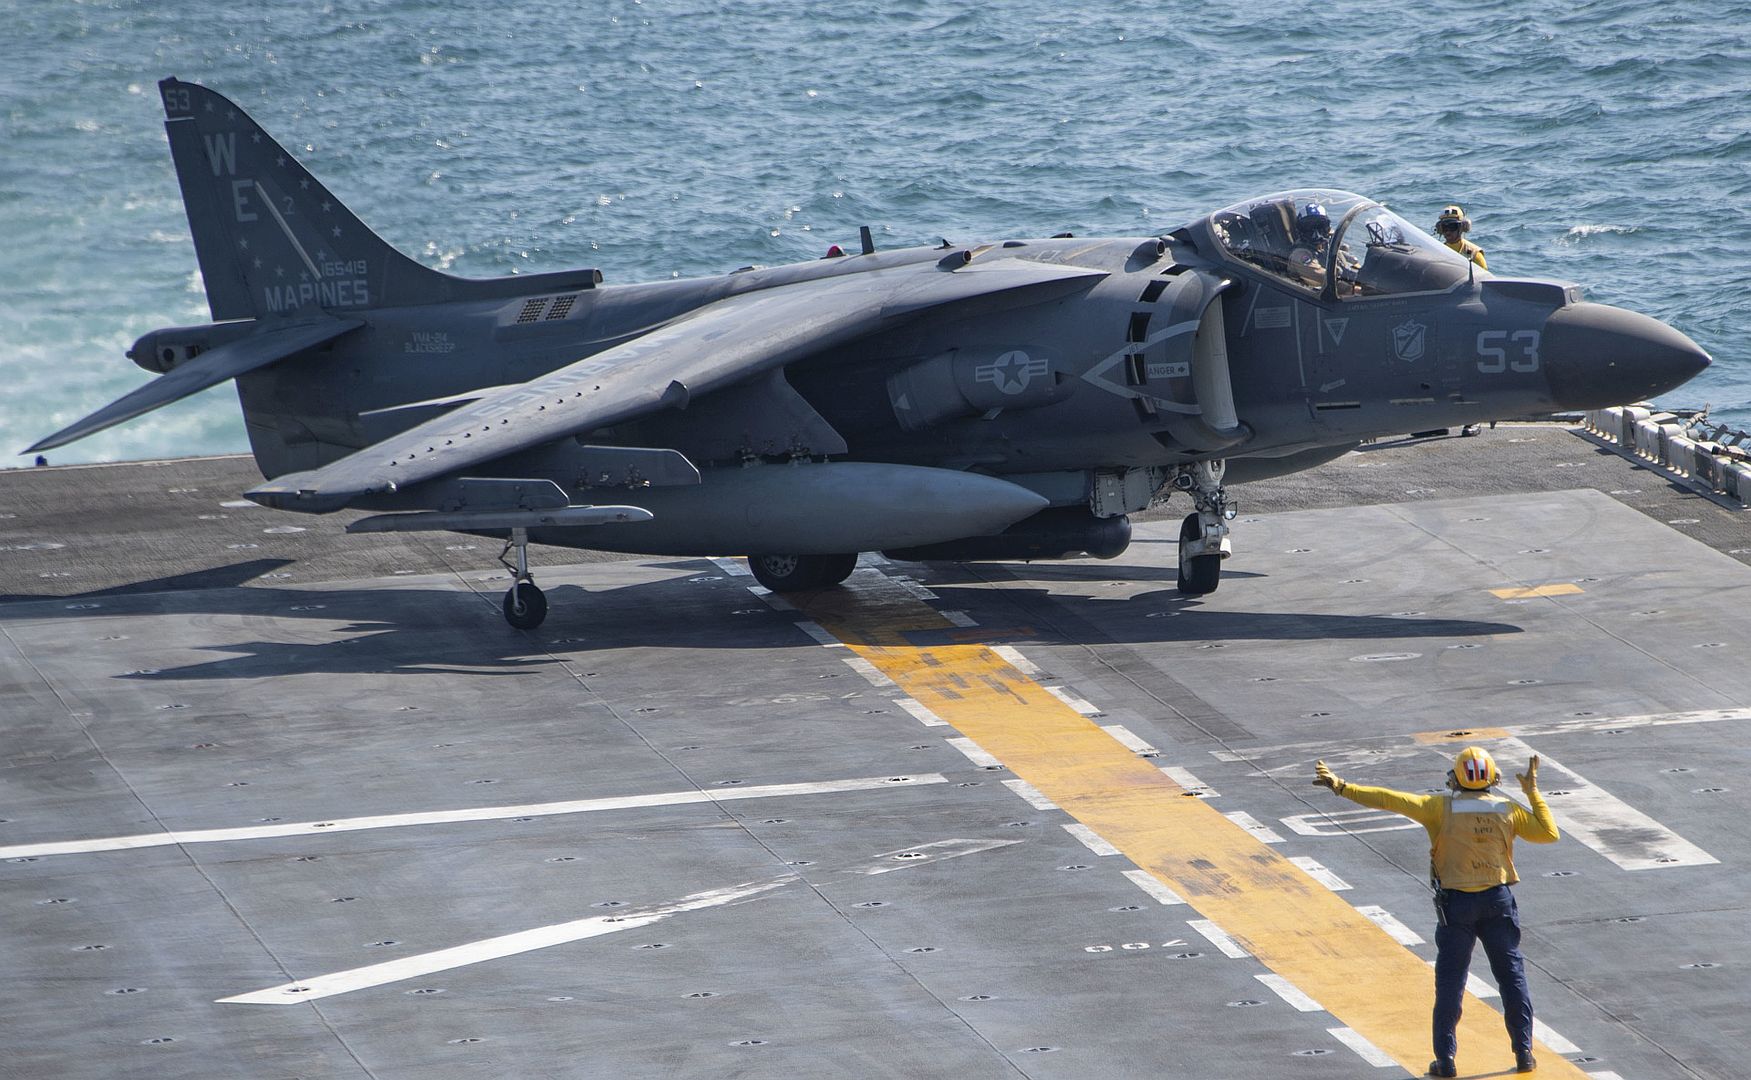 8B Harrier Attached To Marine Attack Squadron 214 11th Marine Expeditionary Unit On The Flight Deck Of The Amphibious Assault Ship USS Essex